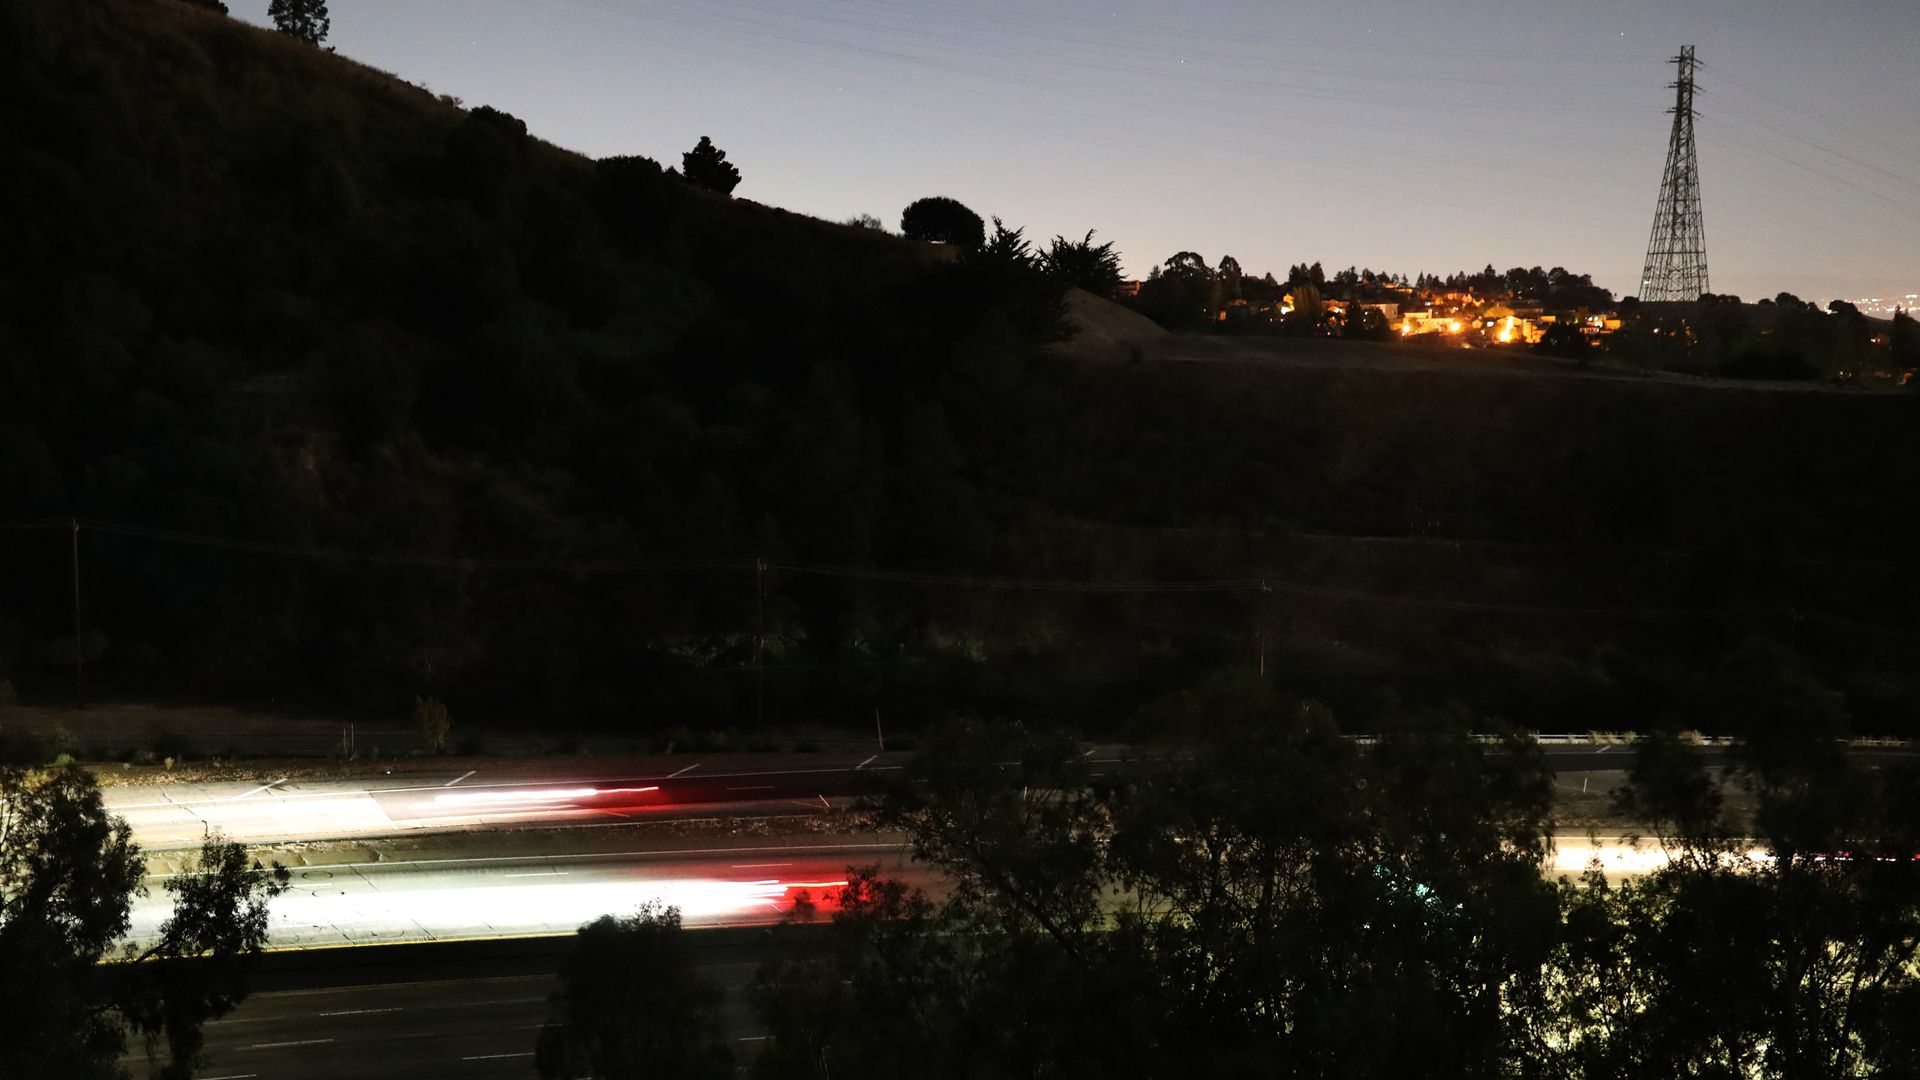 Streaks of lights from vehicles drive along highway 24 during the PG&E power outage in Oakland, Calif., on Thursday, Oct. 10